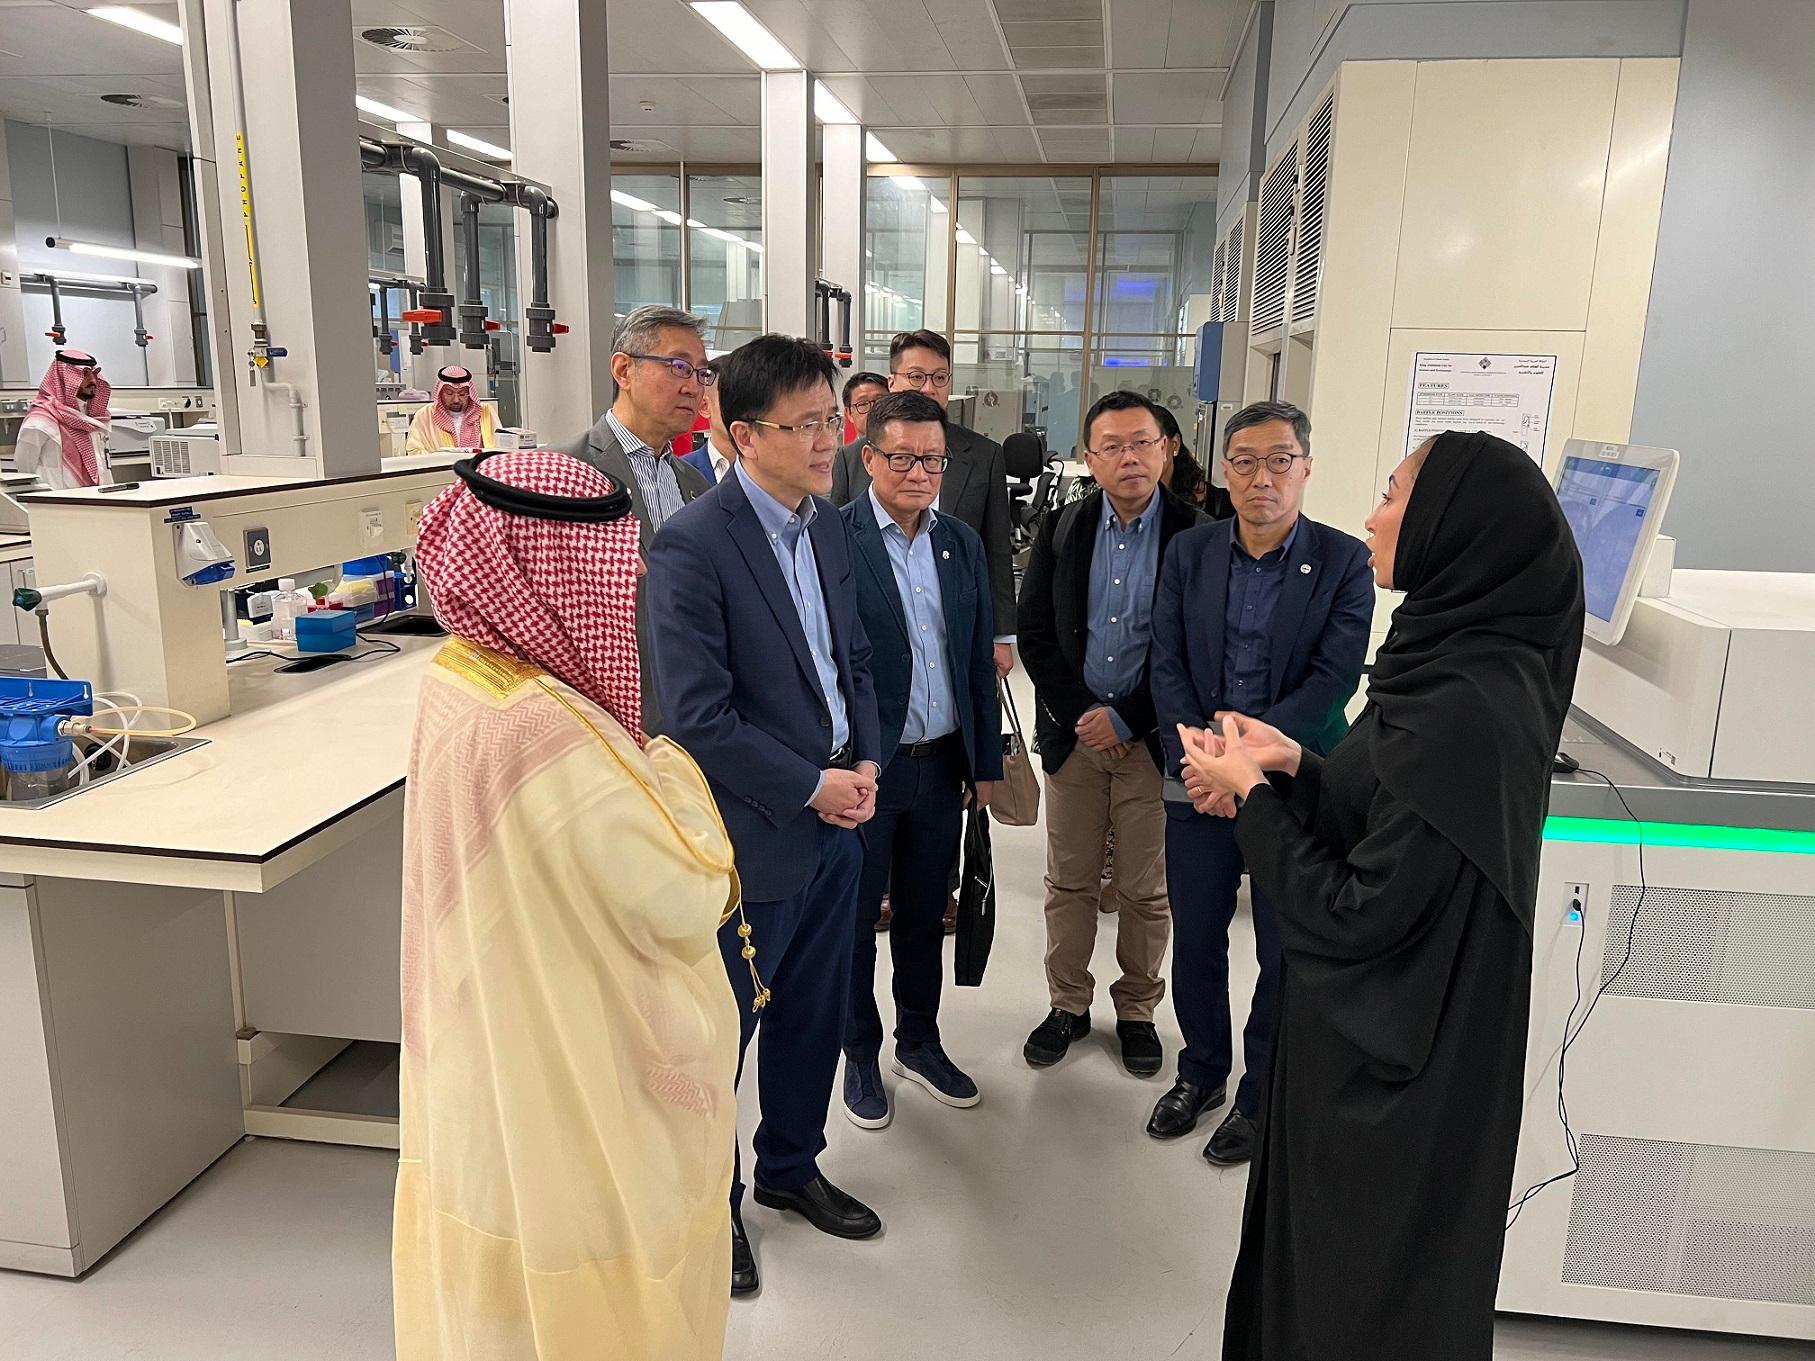 The Secretary for Innovation, Technology and Industry, Professor Sun Dong (third left), visited a number of laboratories in King Abdulaziz City for Science and Technology on March 3 (Riyadh time). Looking on are the Chief Executive Officer of the Hong Kong Science and Technology Parks Corporation, Mr Albert Wong (second right); and the Chief Executive Officer of the Hong Kong Cyberport Management Company Limited, Mr Peter Yan (second left).